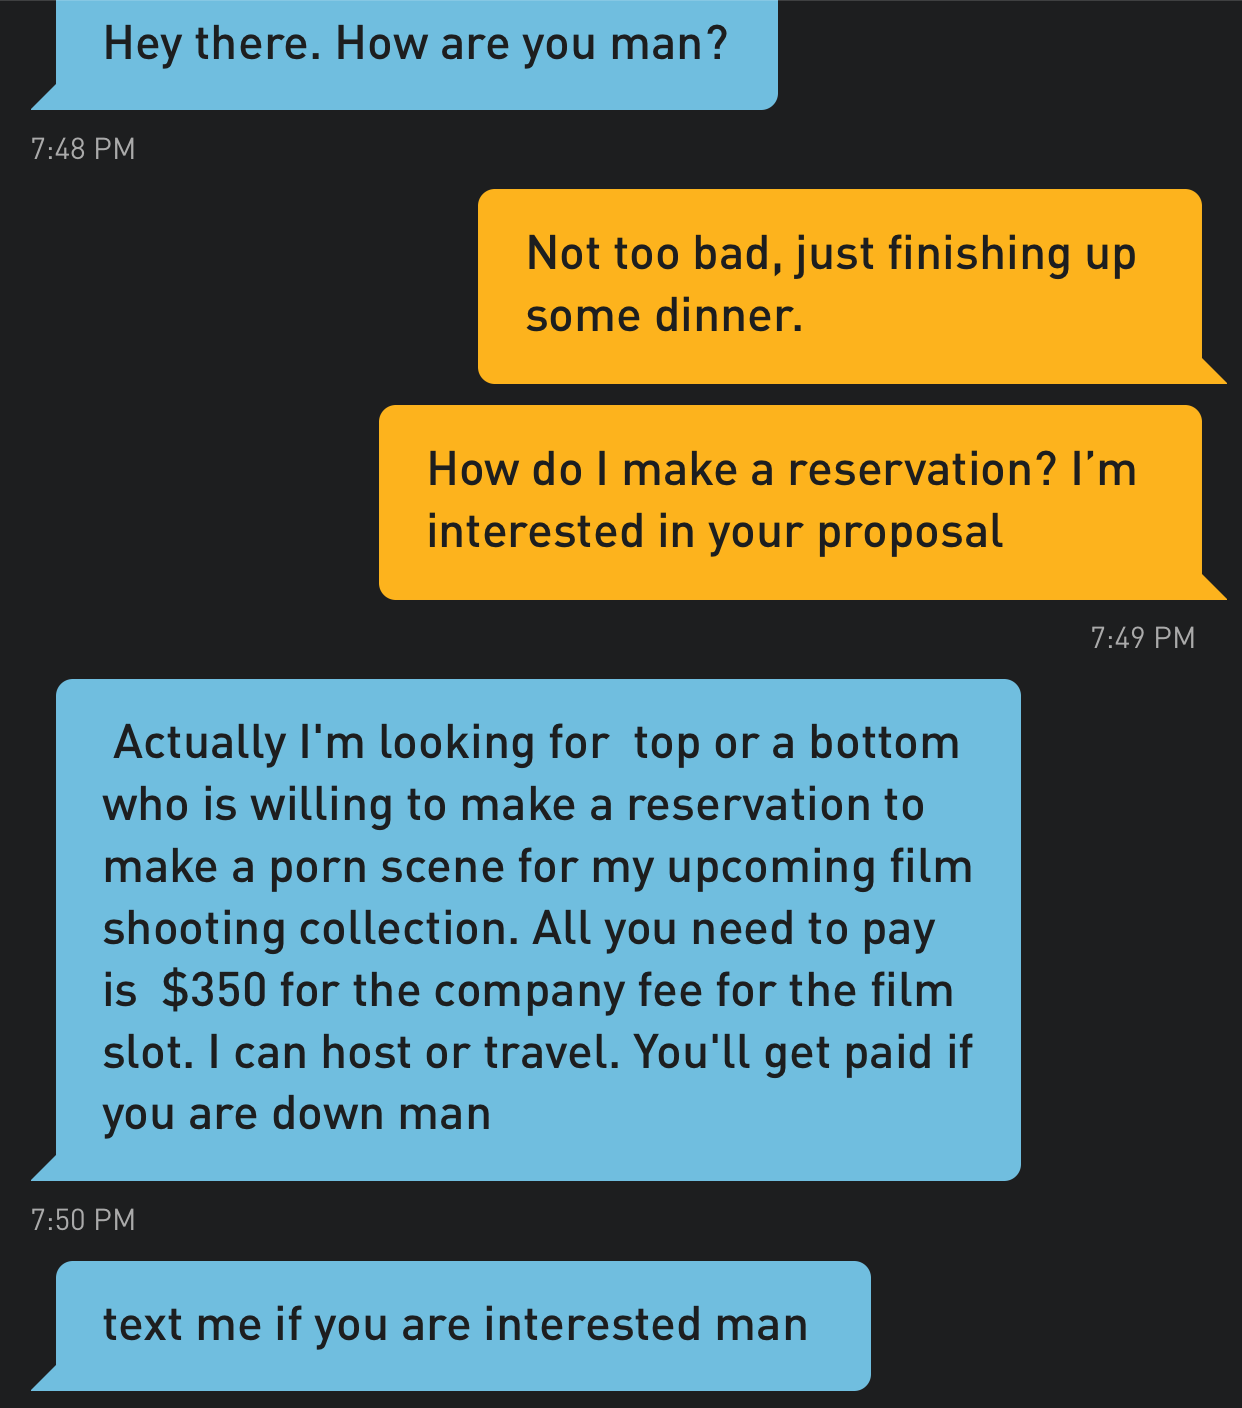 An exchange with a victim over Grindr.